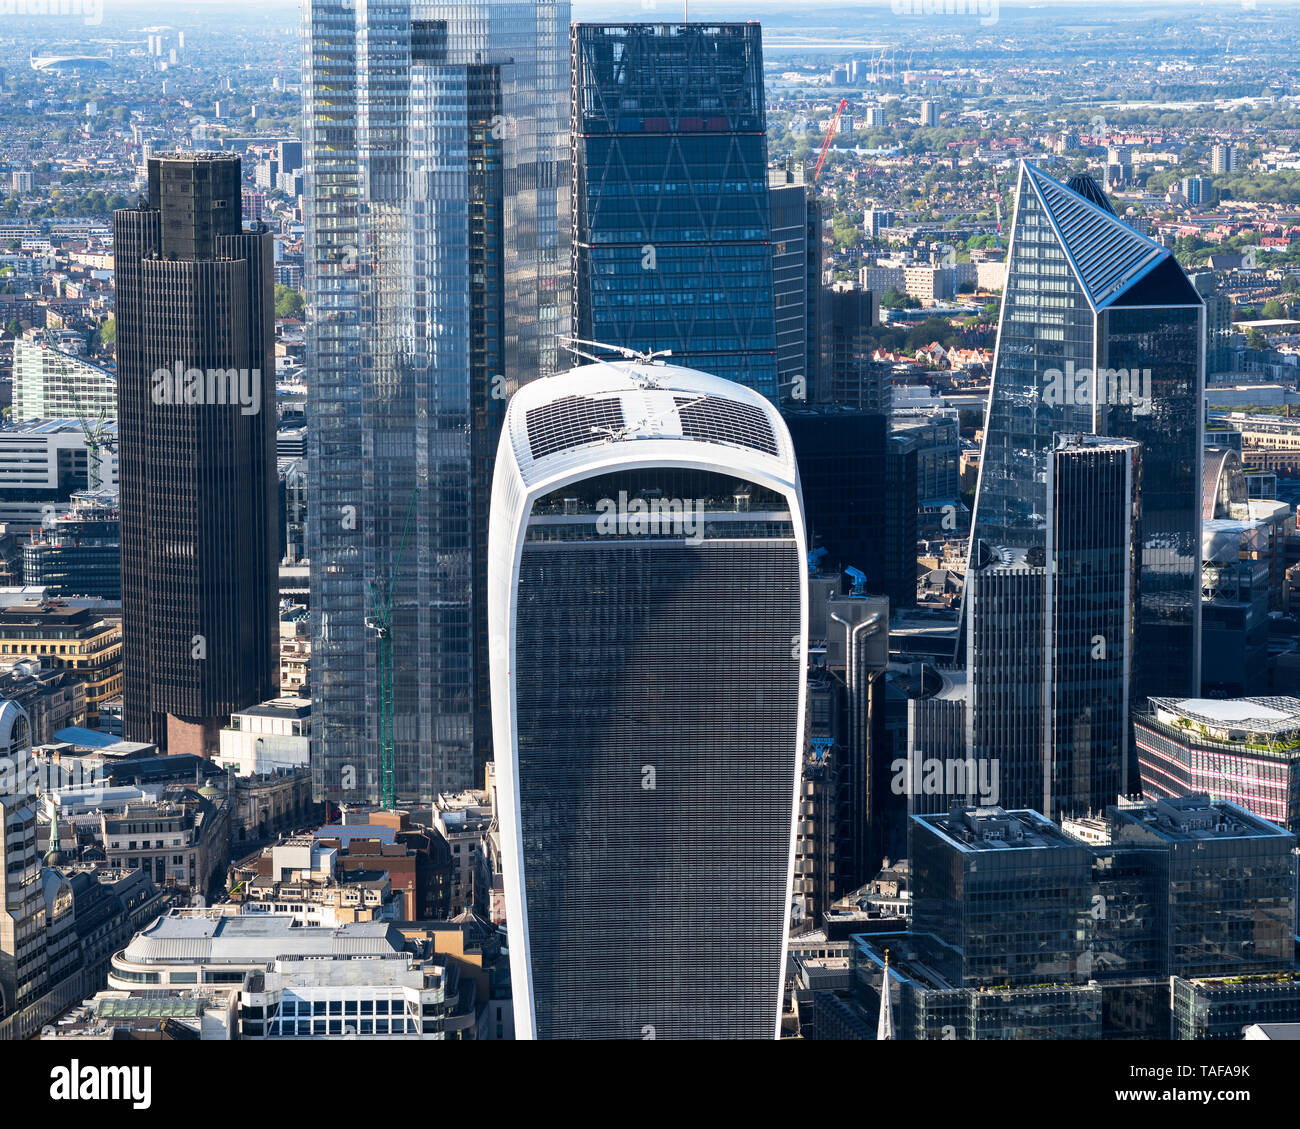 Aerial view over city skyscrapers and London financial district Stock Photo